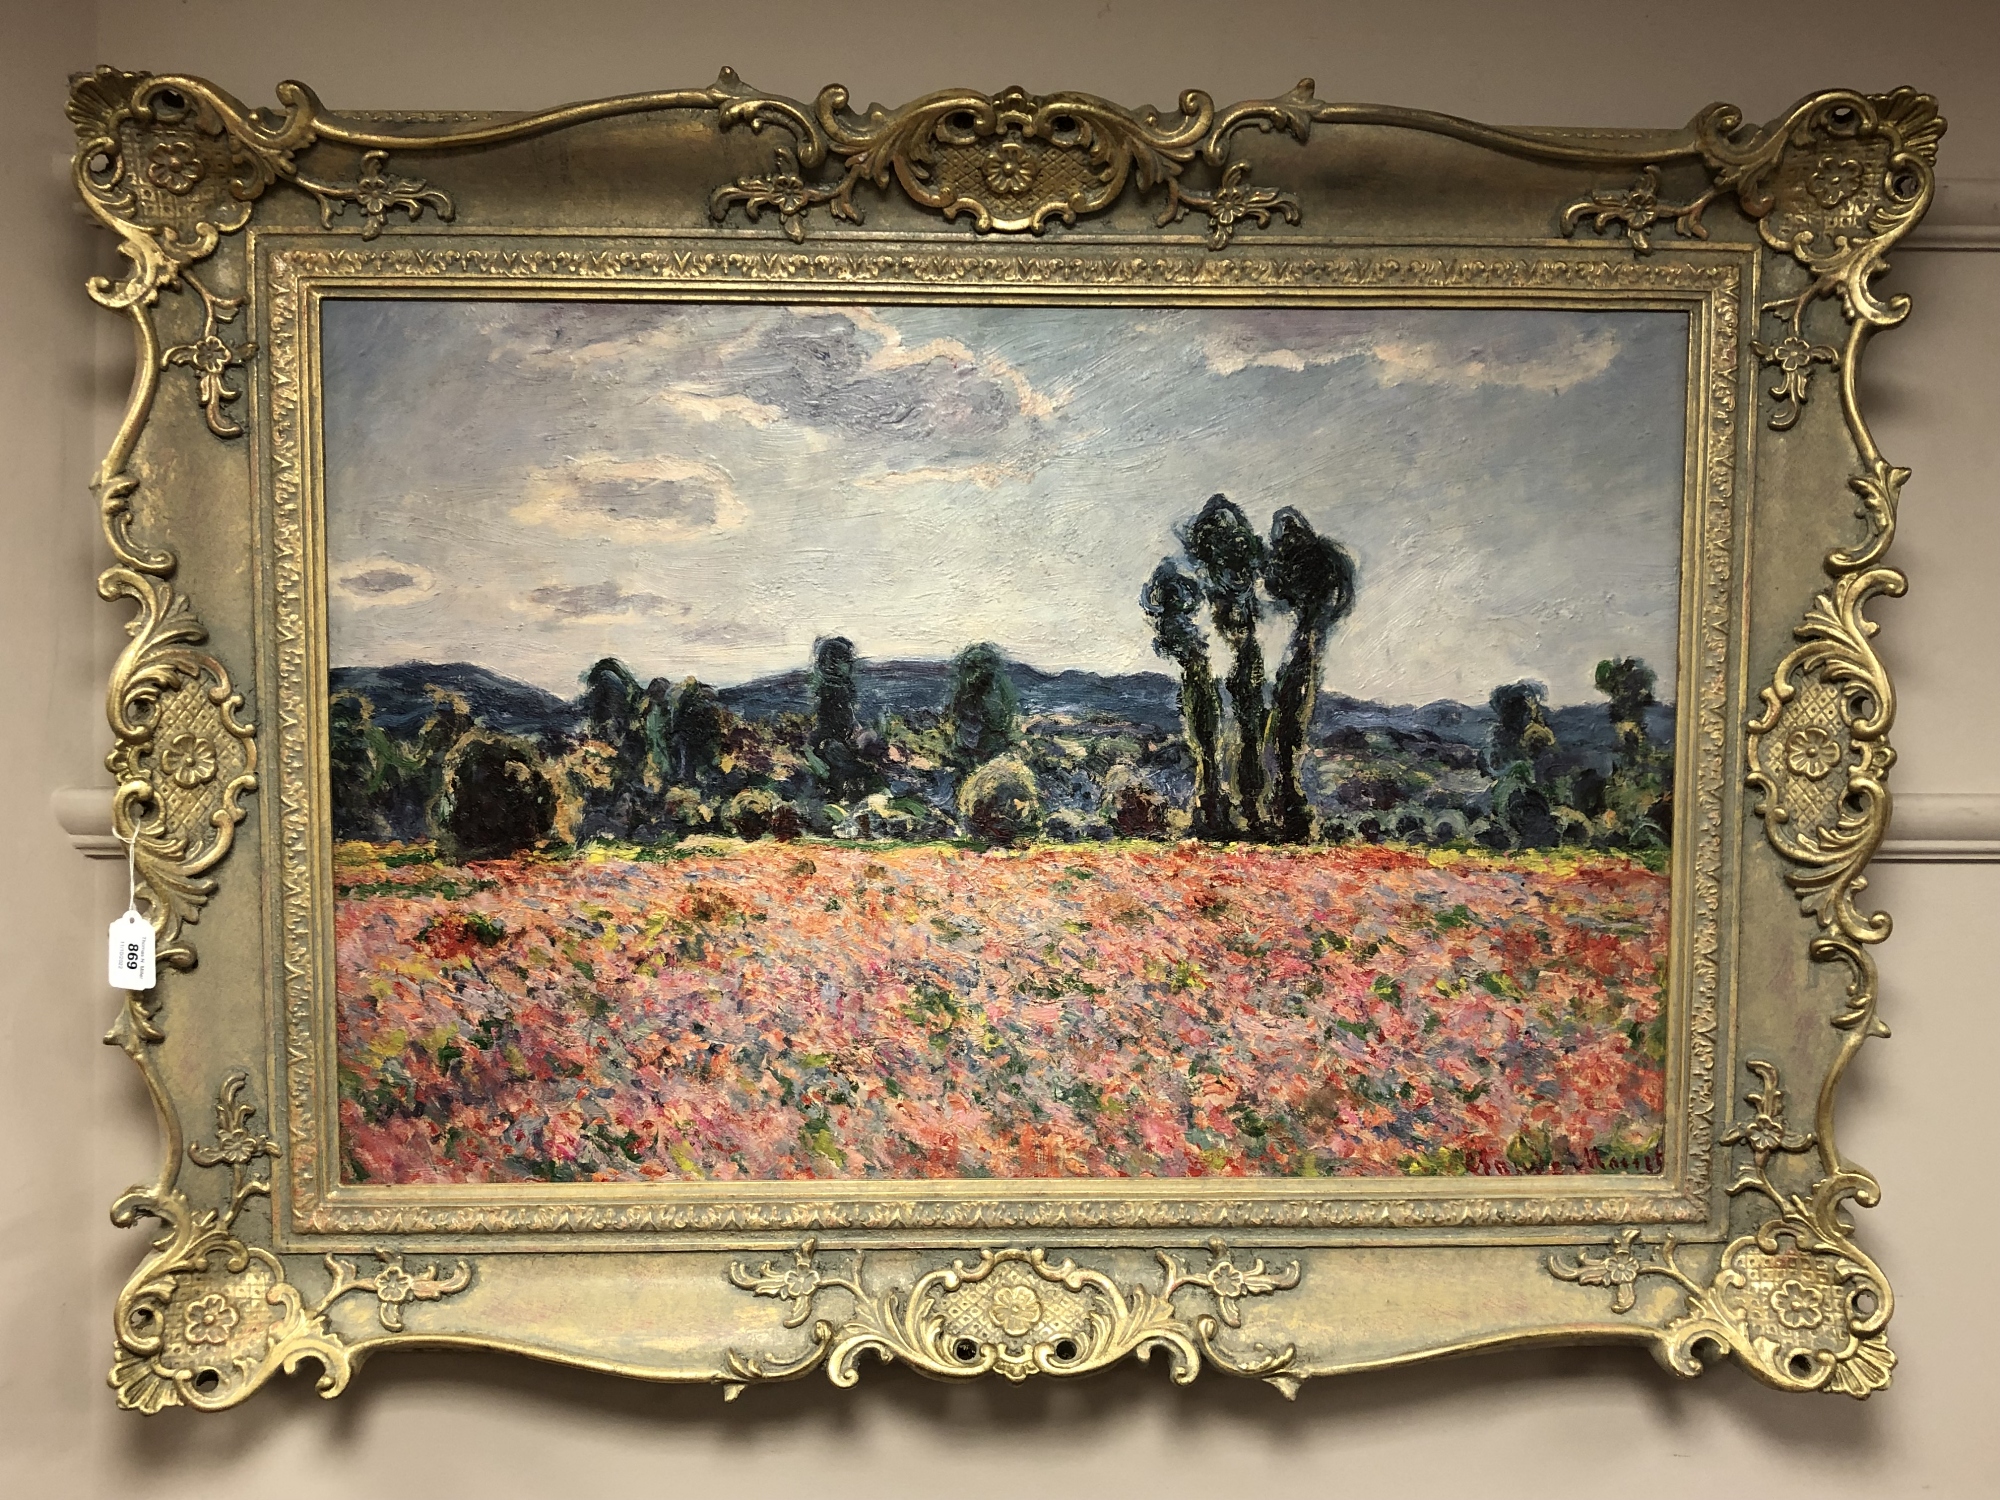 An Artagraph edition on canvas depicting a field of flowers with trees beyond, 88cm by 57cm.